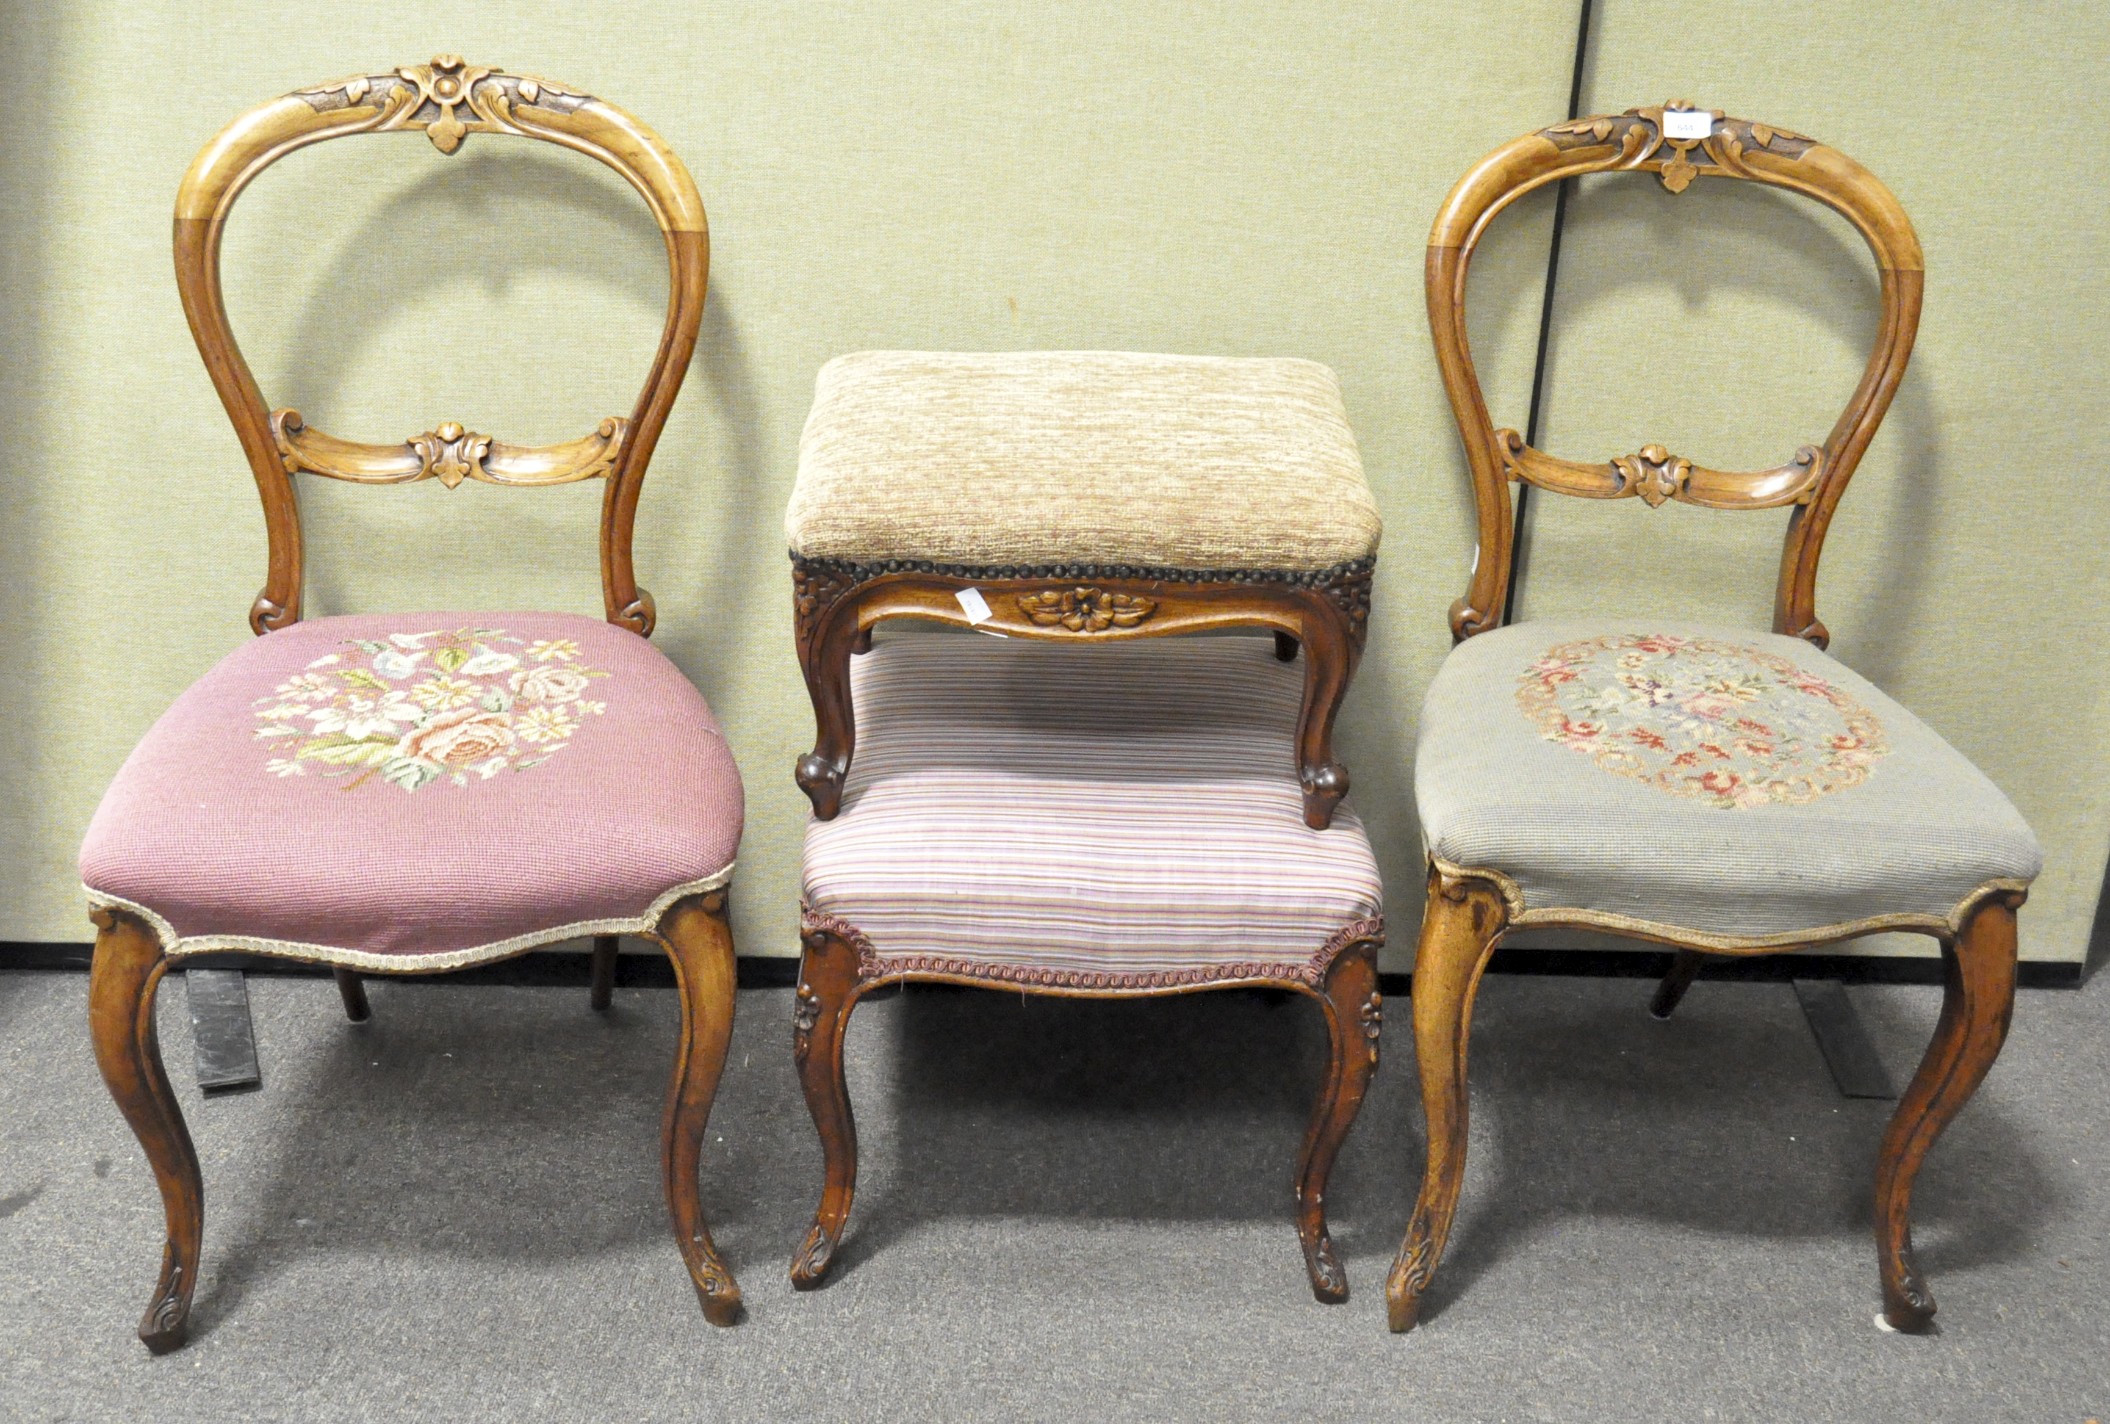 A pair of Victorian balloon back chairs with carved floral details and tapestry upholstered seats,